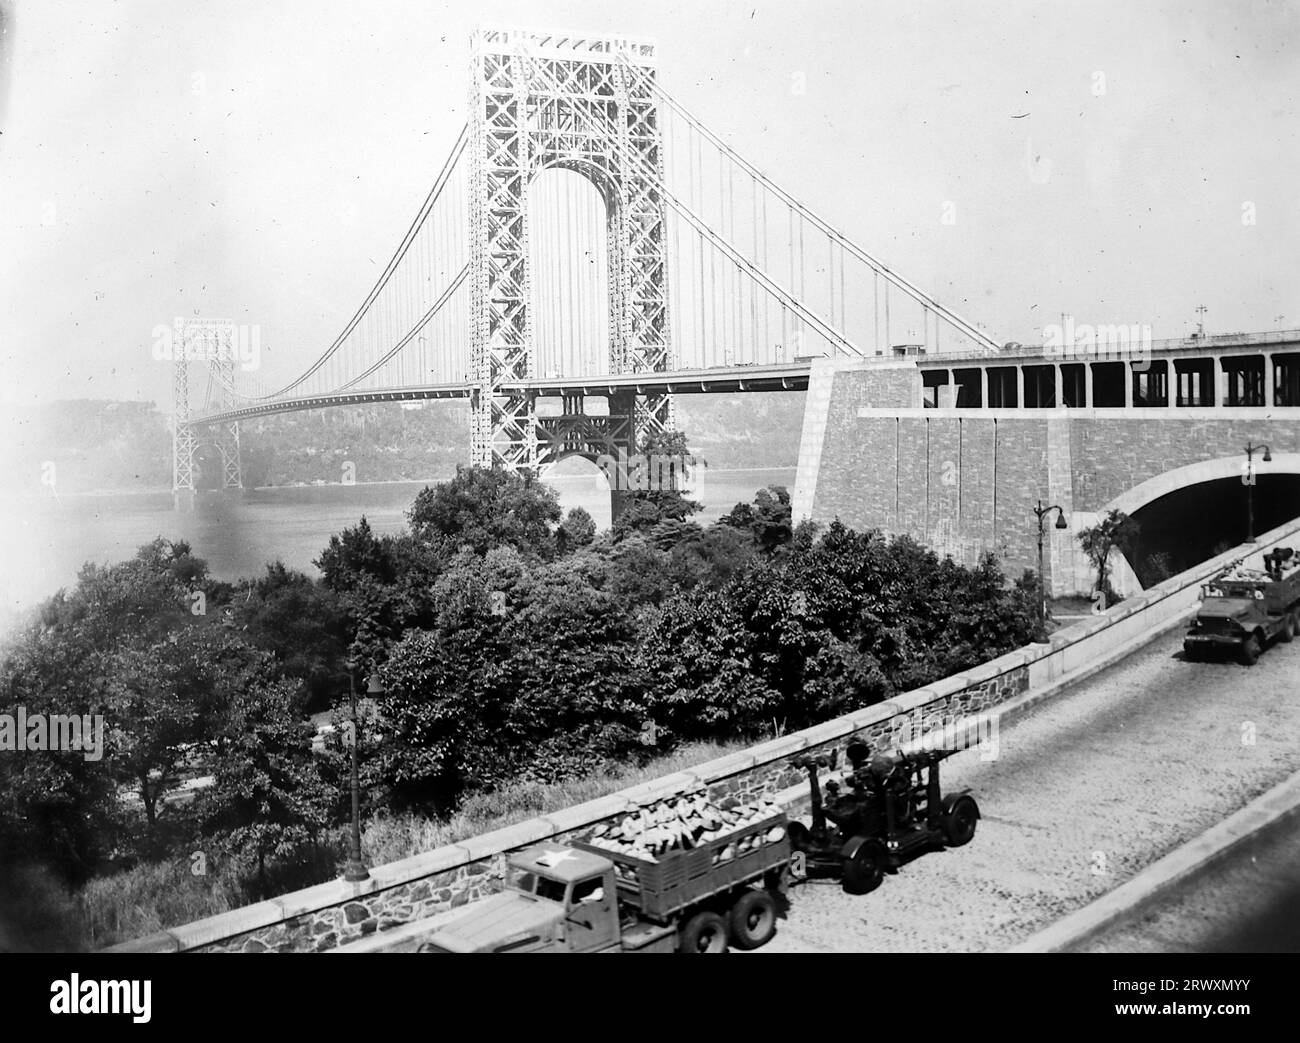 Army trucks on the road close to the George Washington Bridge, New York. Rare photograph: From a collection compiled by an unknown British serviceman covering the No. 1 Composite Demonstration, AA Battery, tour of the USA, from July 11th 1943. This is one from over one hundred images in the collection which were on average around 4x3 inches. Stock Photo